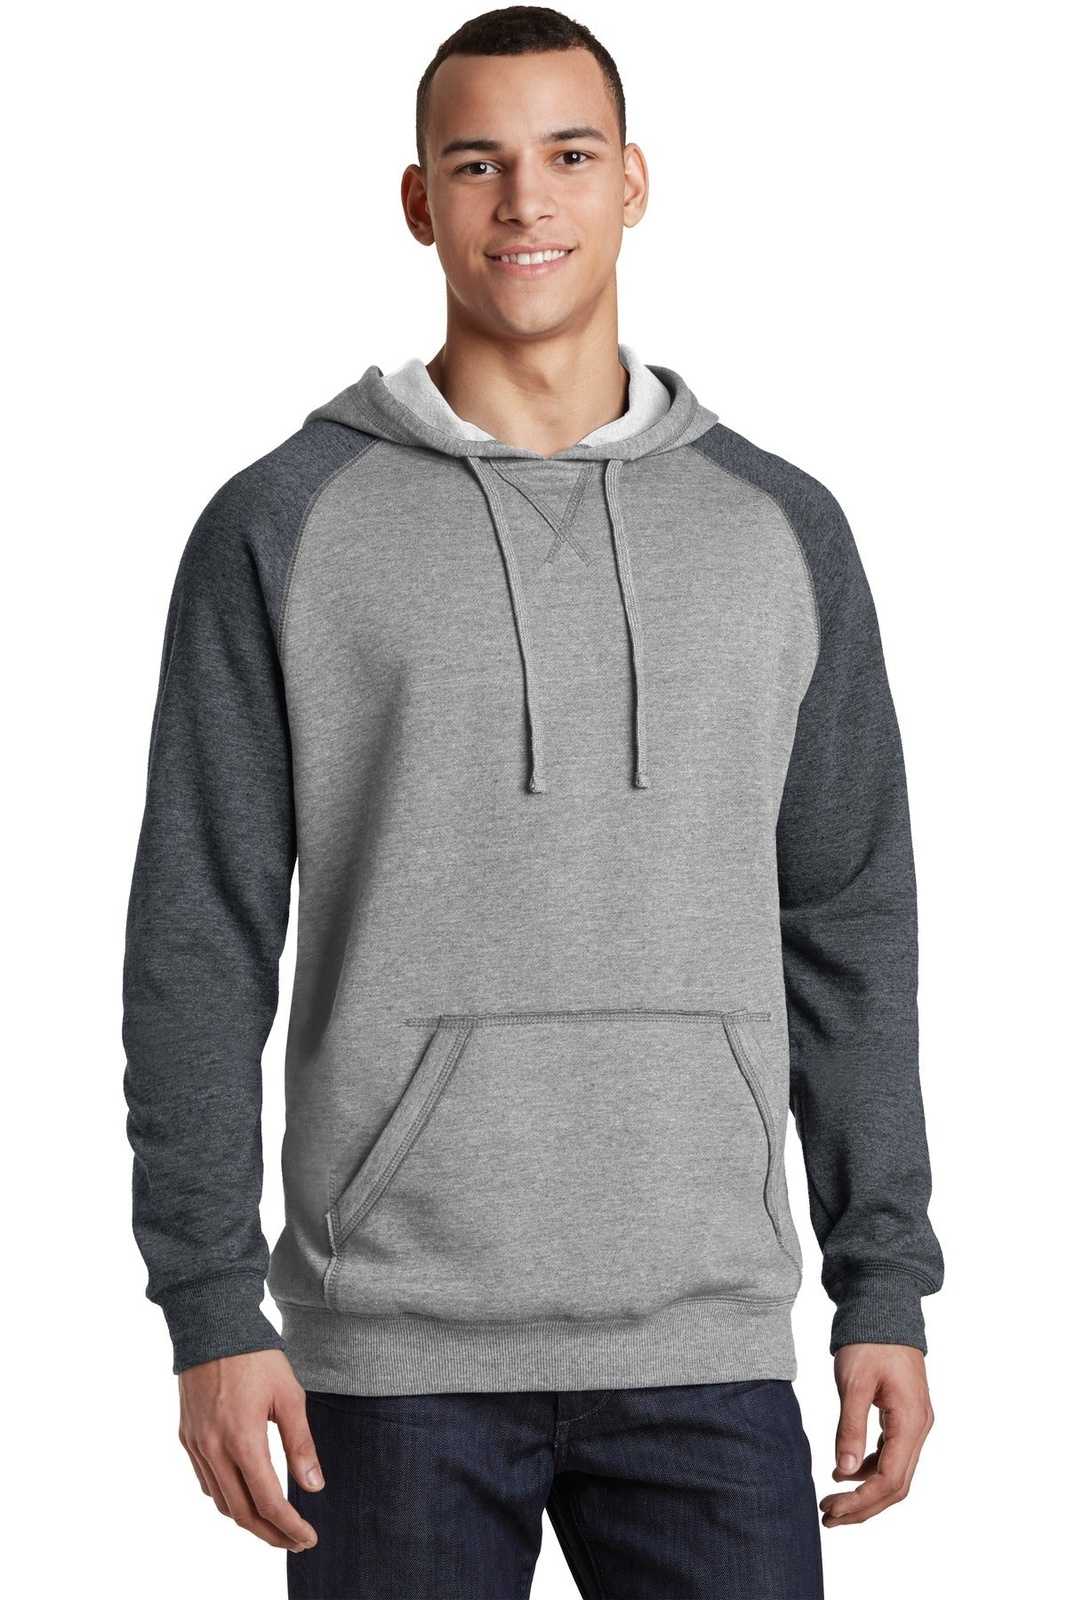 District DT196 Young Mens Lightweight Fleece Raglan Hoodie - Heathered Gray Heathered Charcoal - HIT a Double - 1